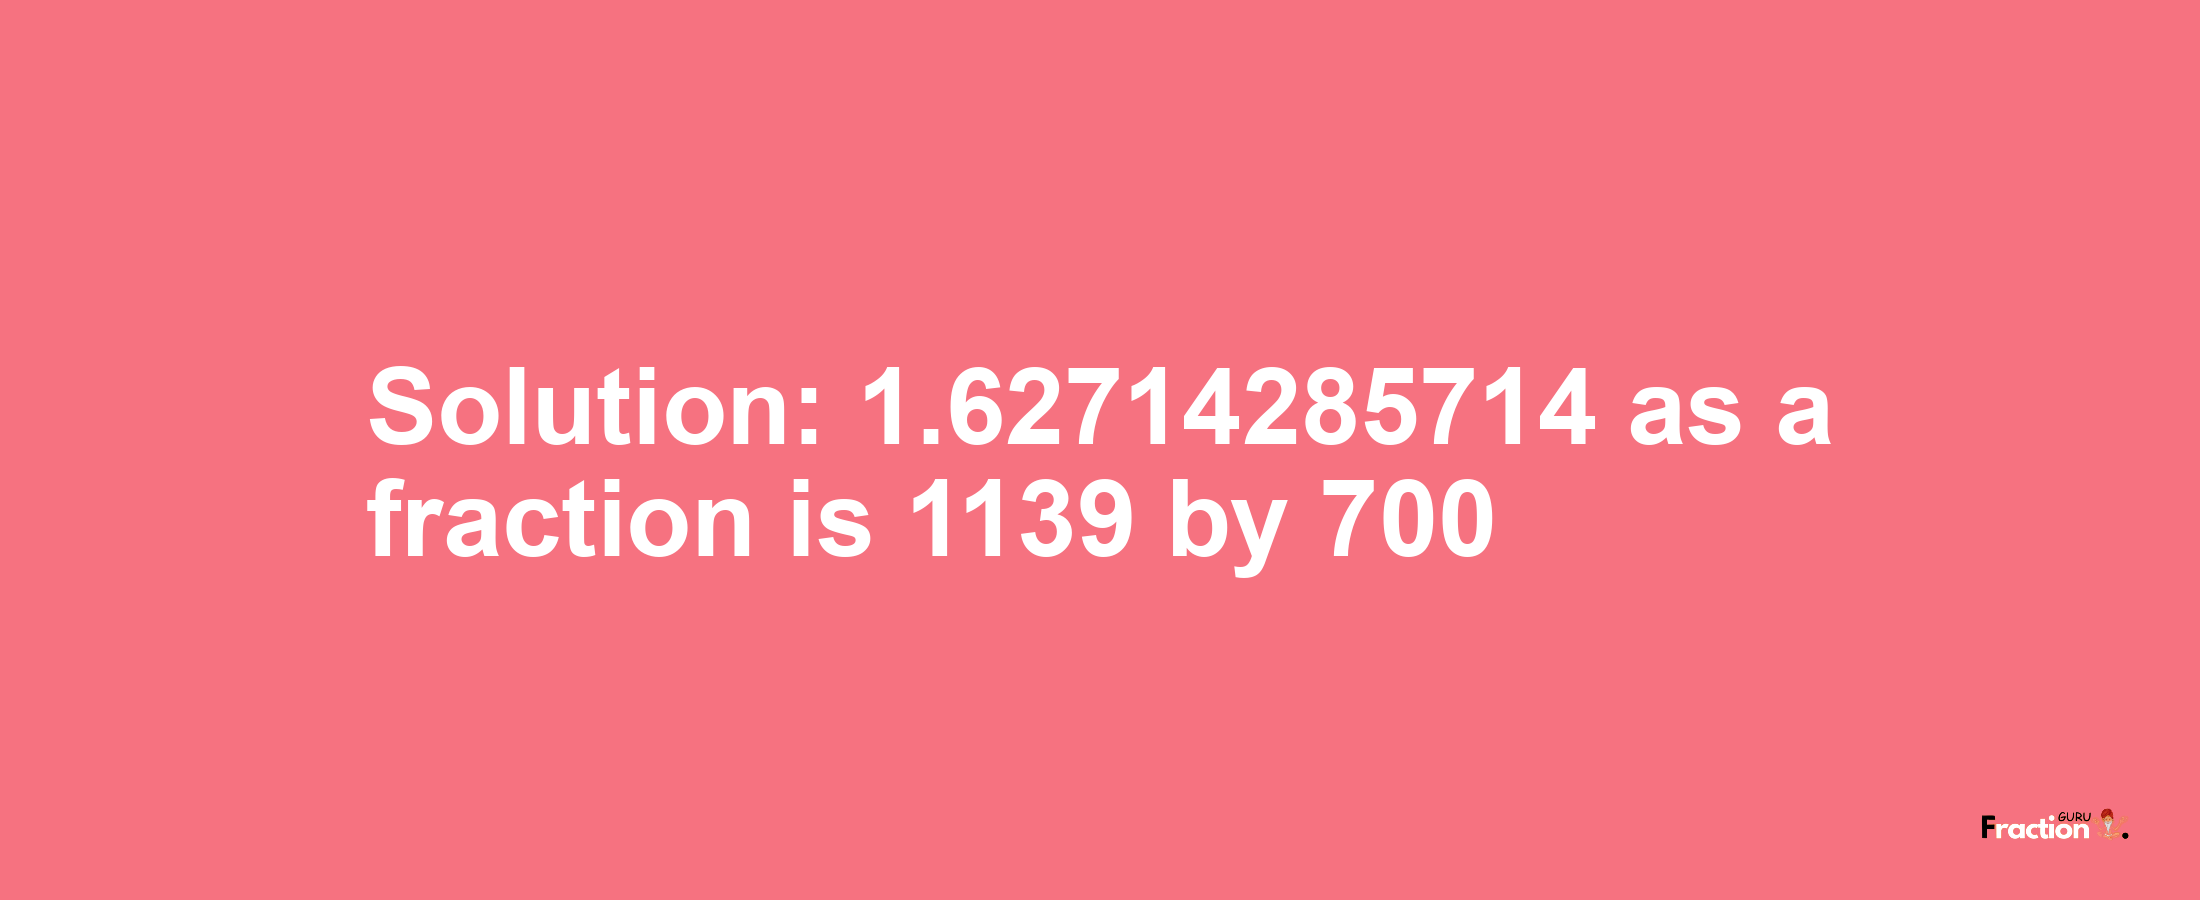 Solution:1.62714285714 as a fraction is 1139/700